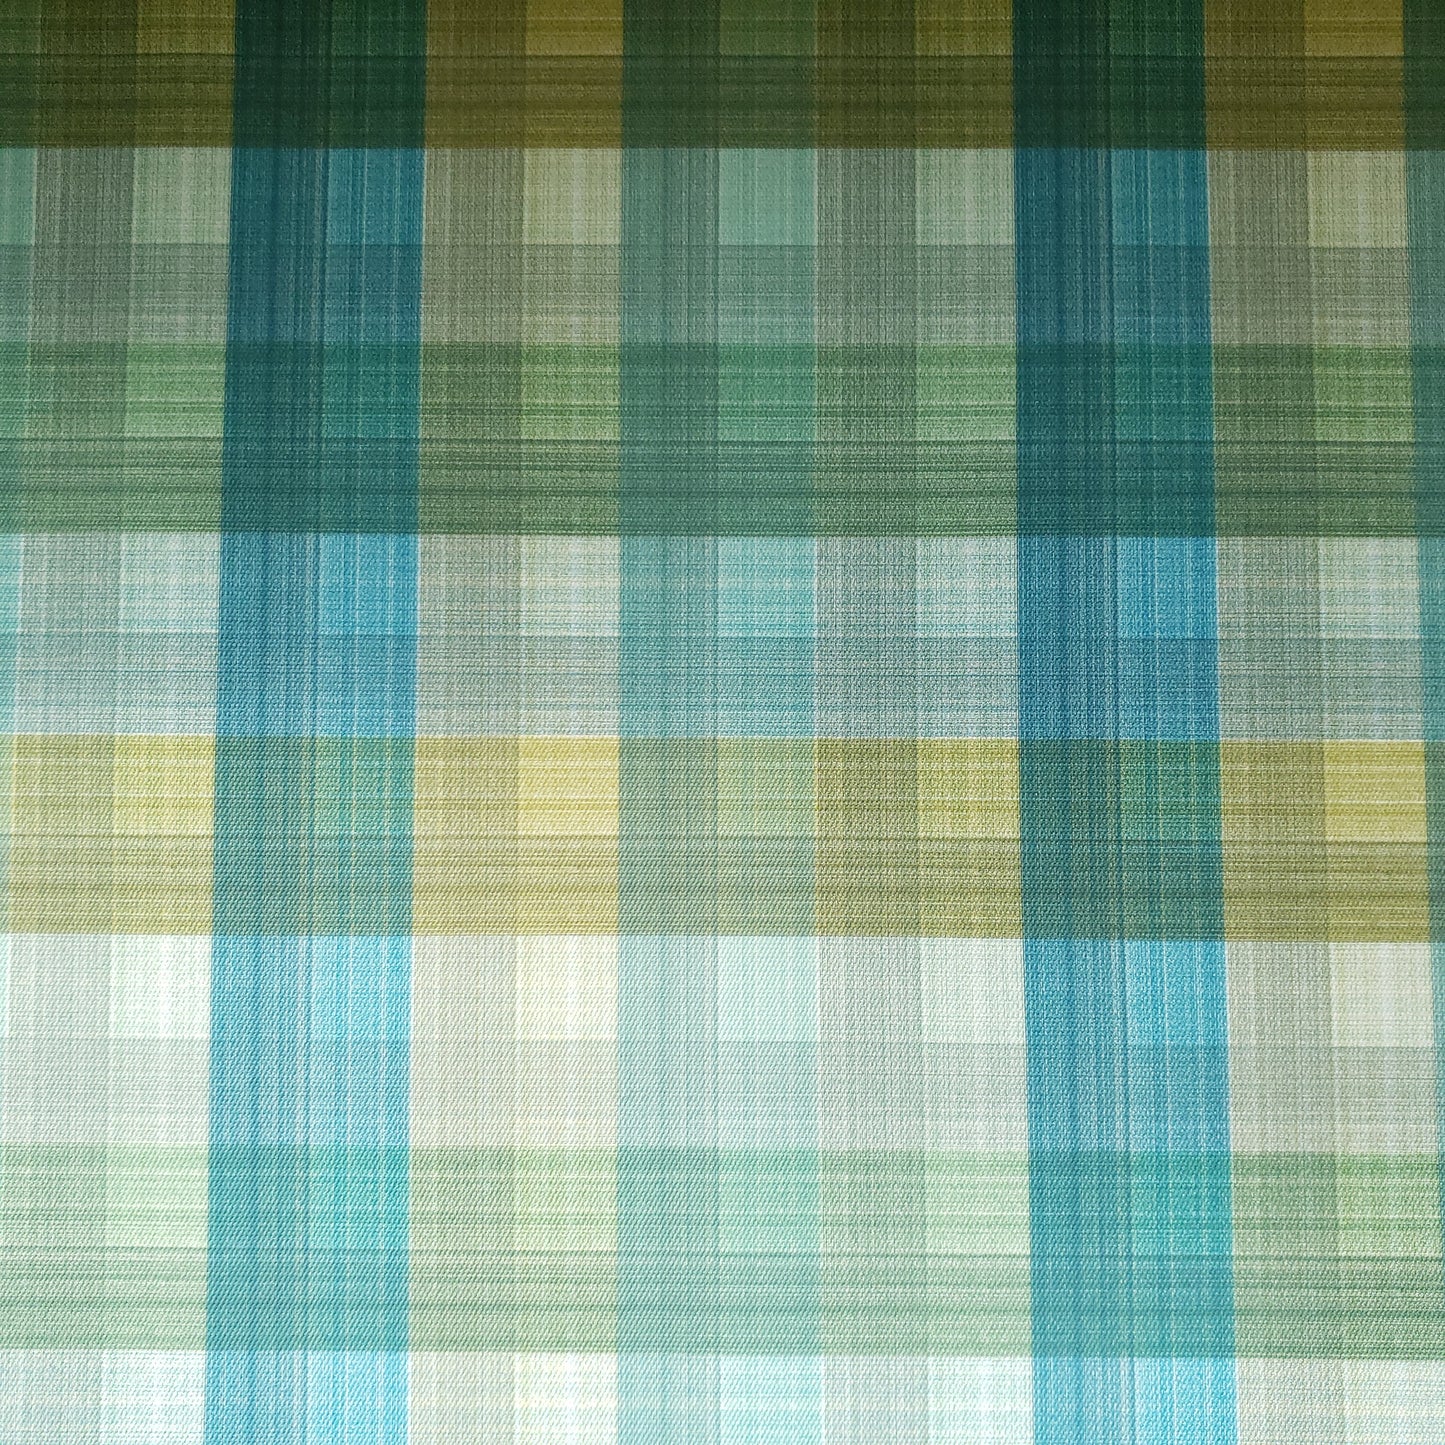 Grass Stain Plaid Patterned Vinyl